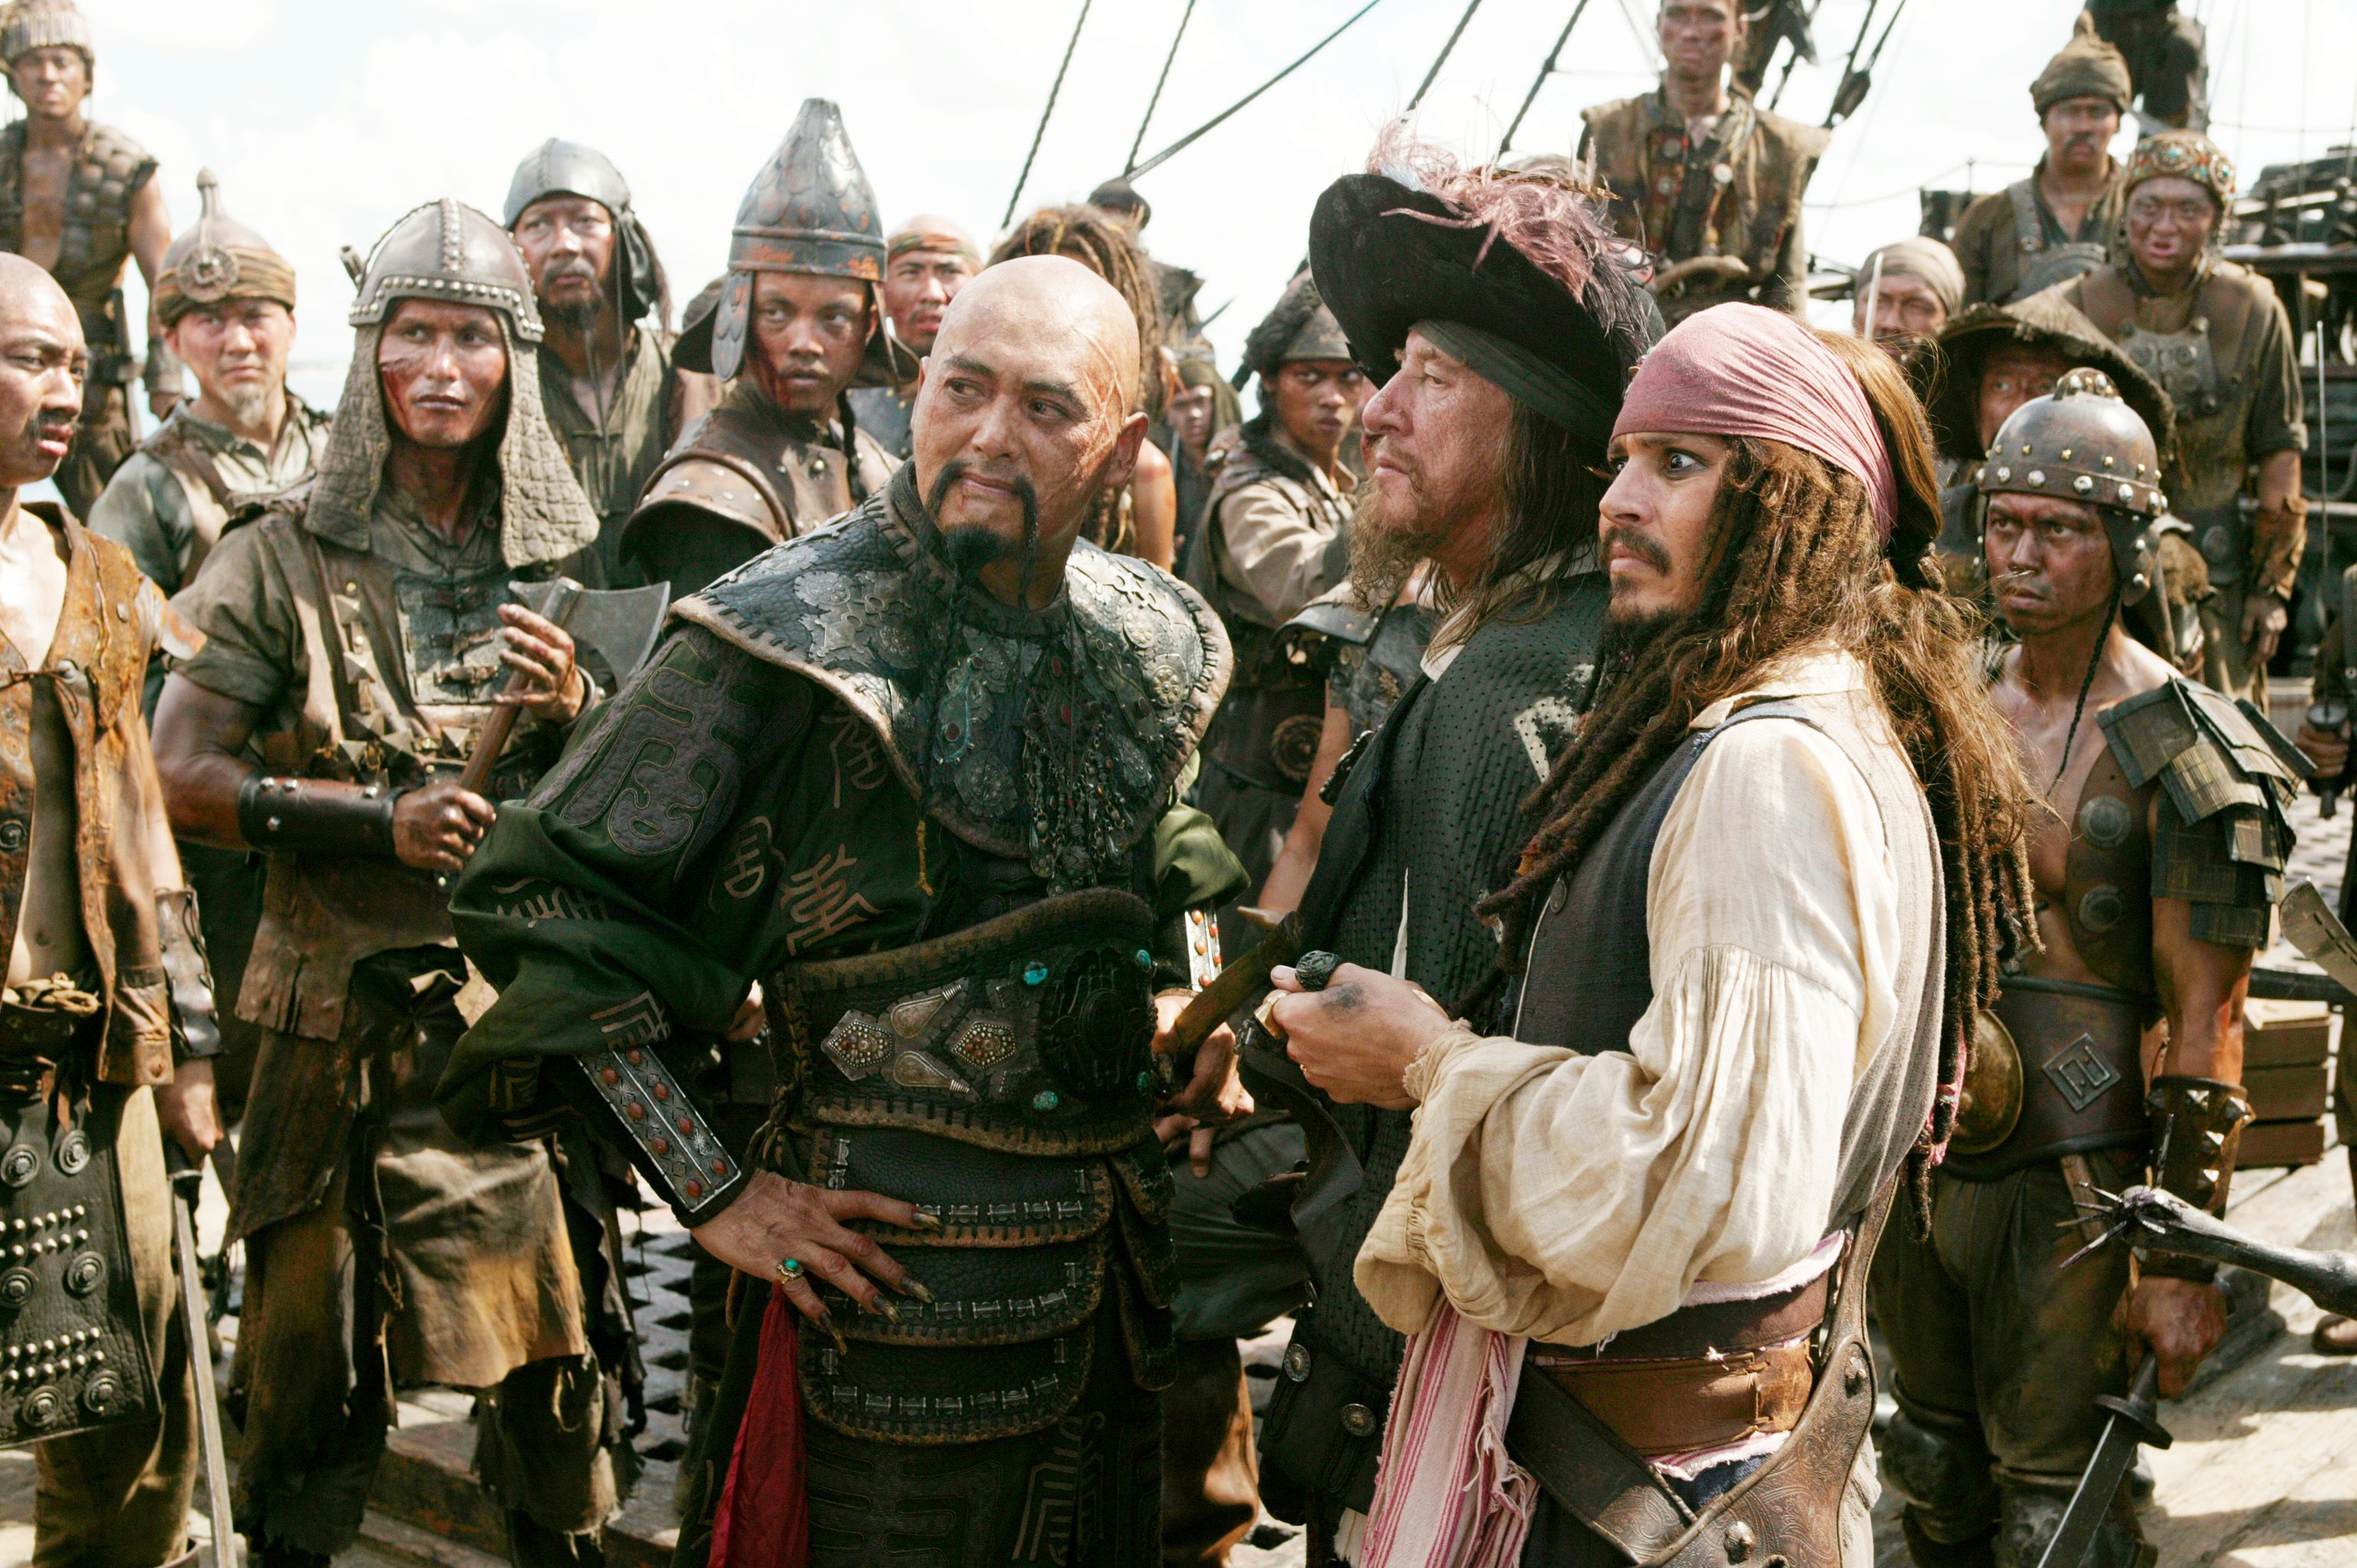 hector barbossa, movie, pirates of the caribbean: at world's end, captain sao feng, chow yun fat, geoffrey rush, jack sparrow, johnny depp, pirates of the caribbean